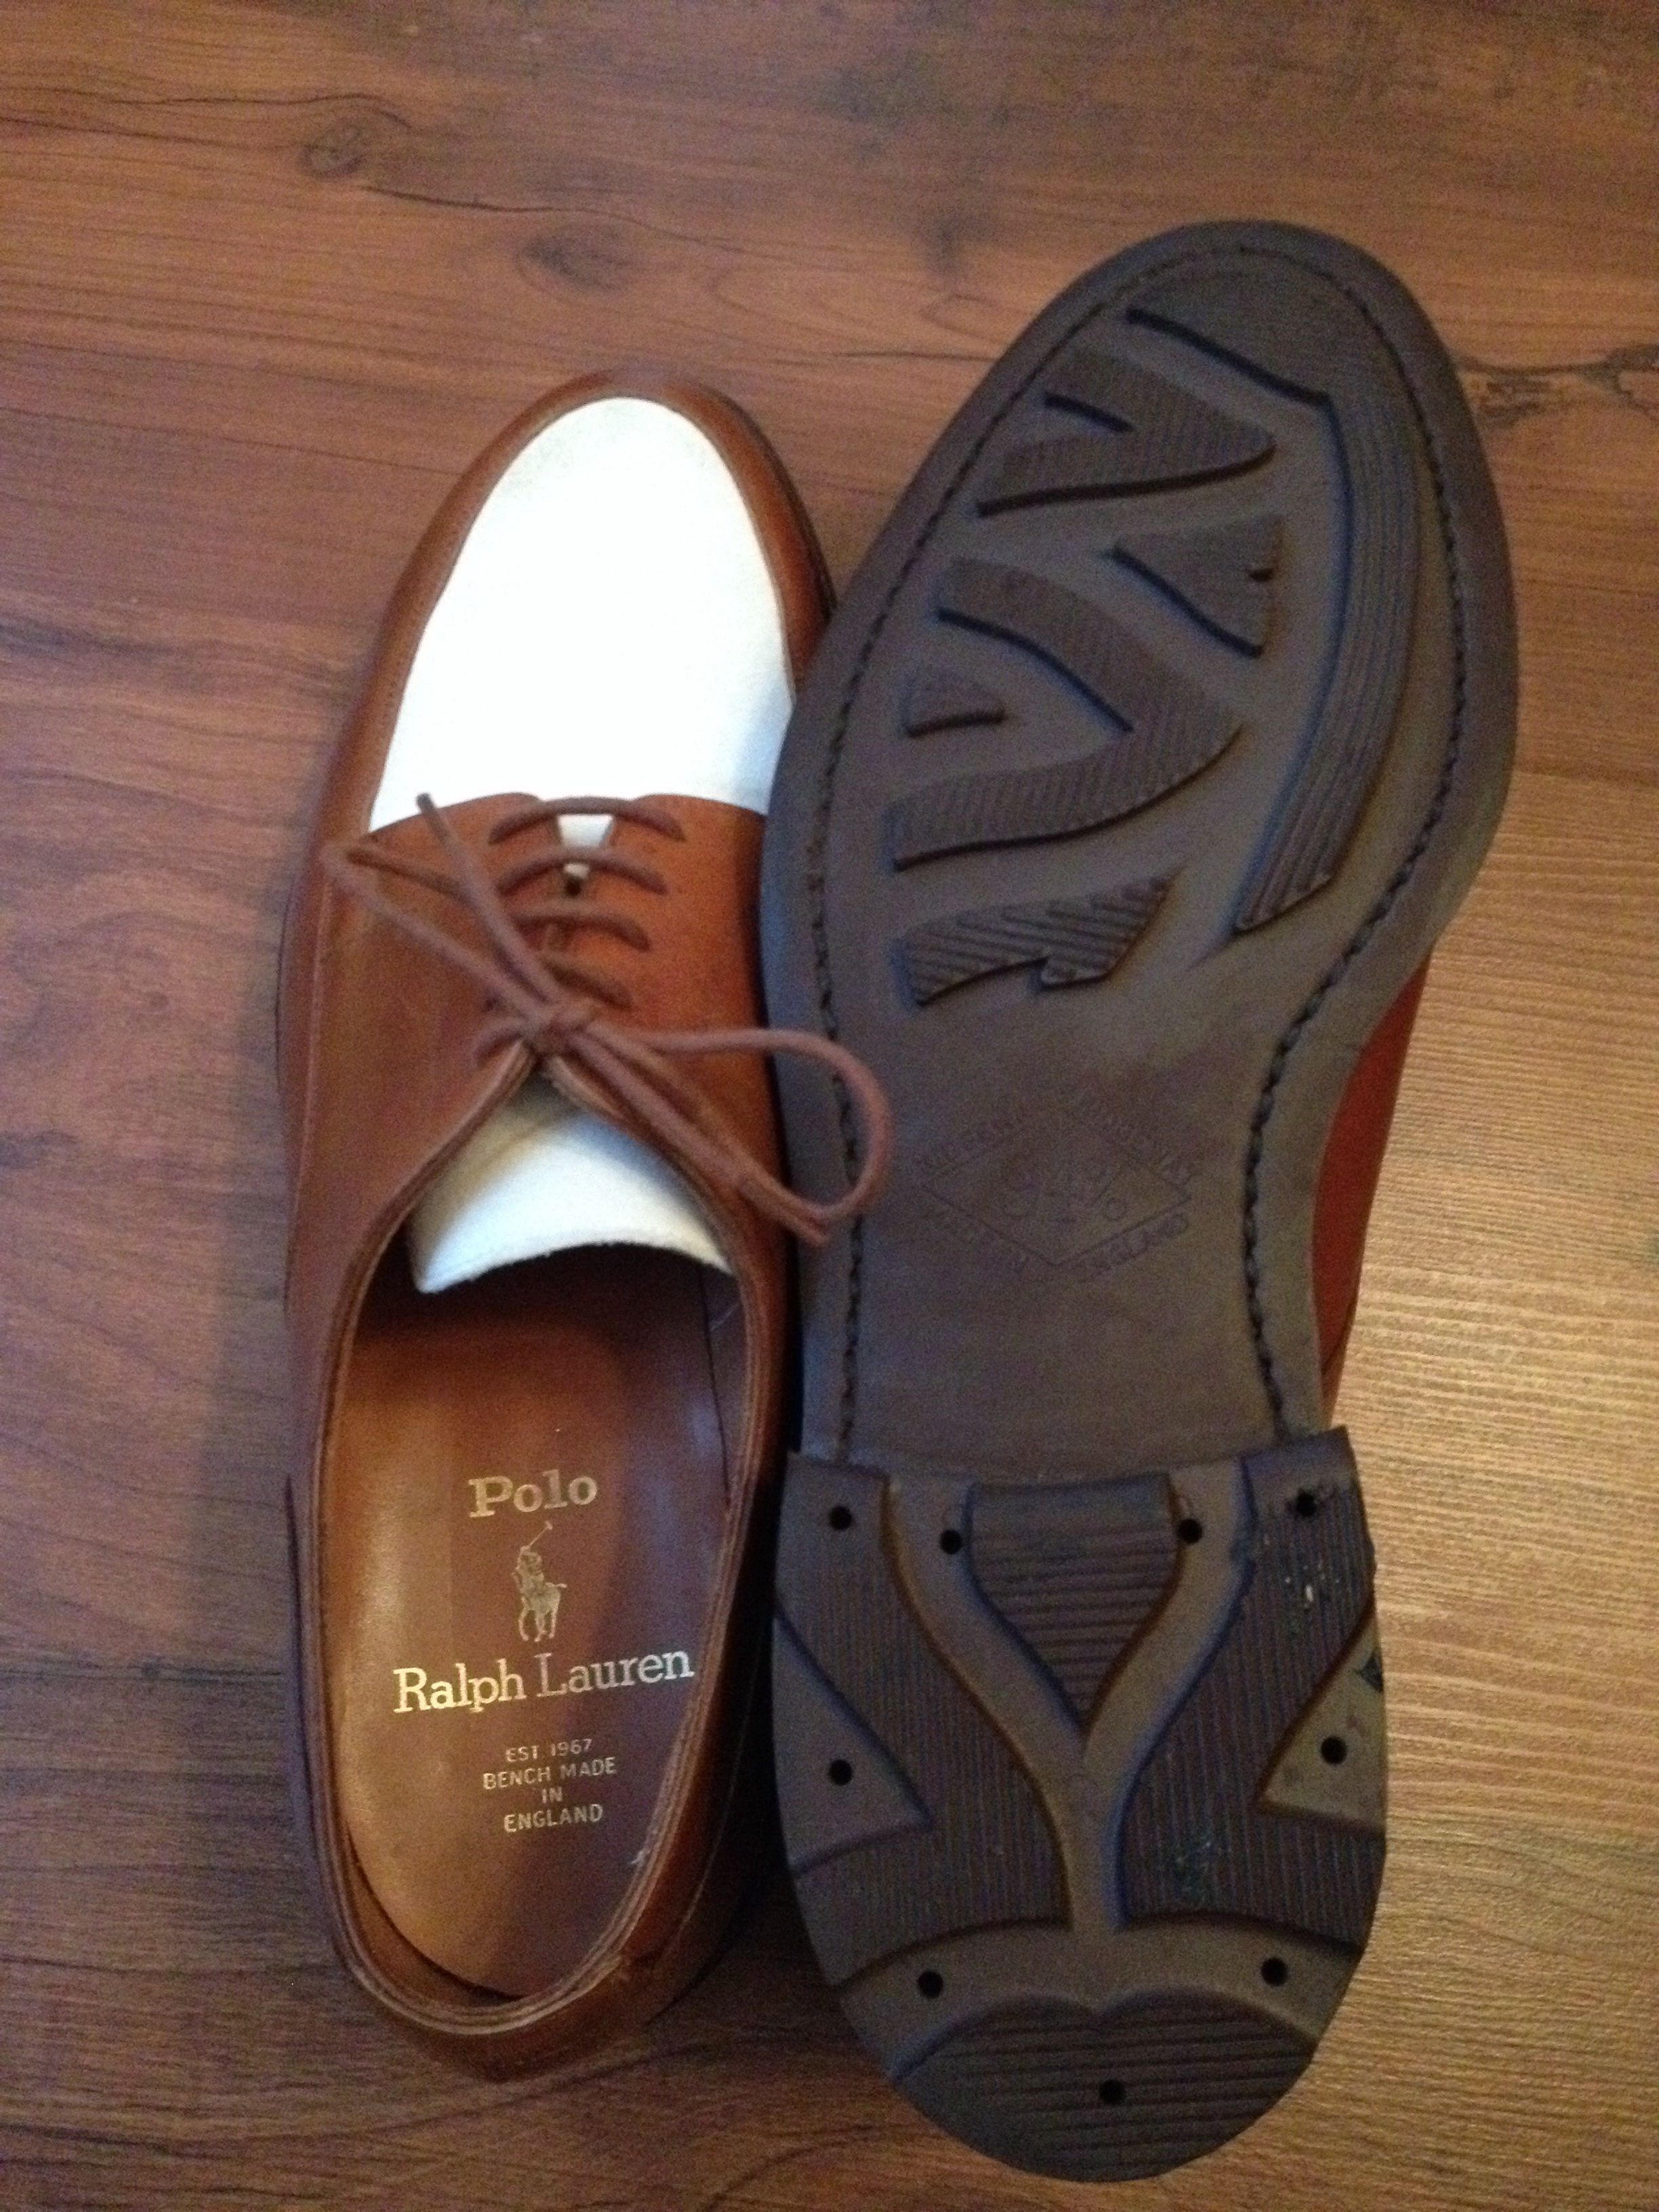 Who made this Polo Ralph Lauren shoes? | Styleforum